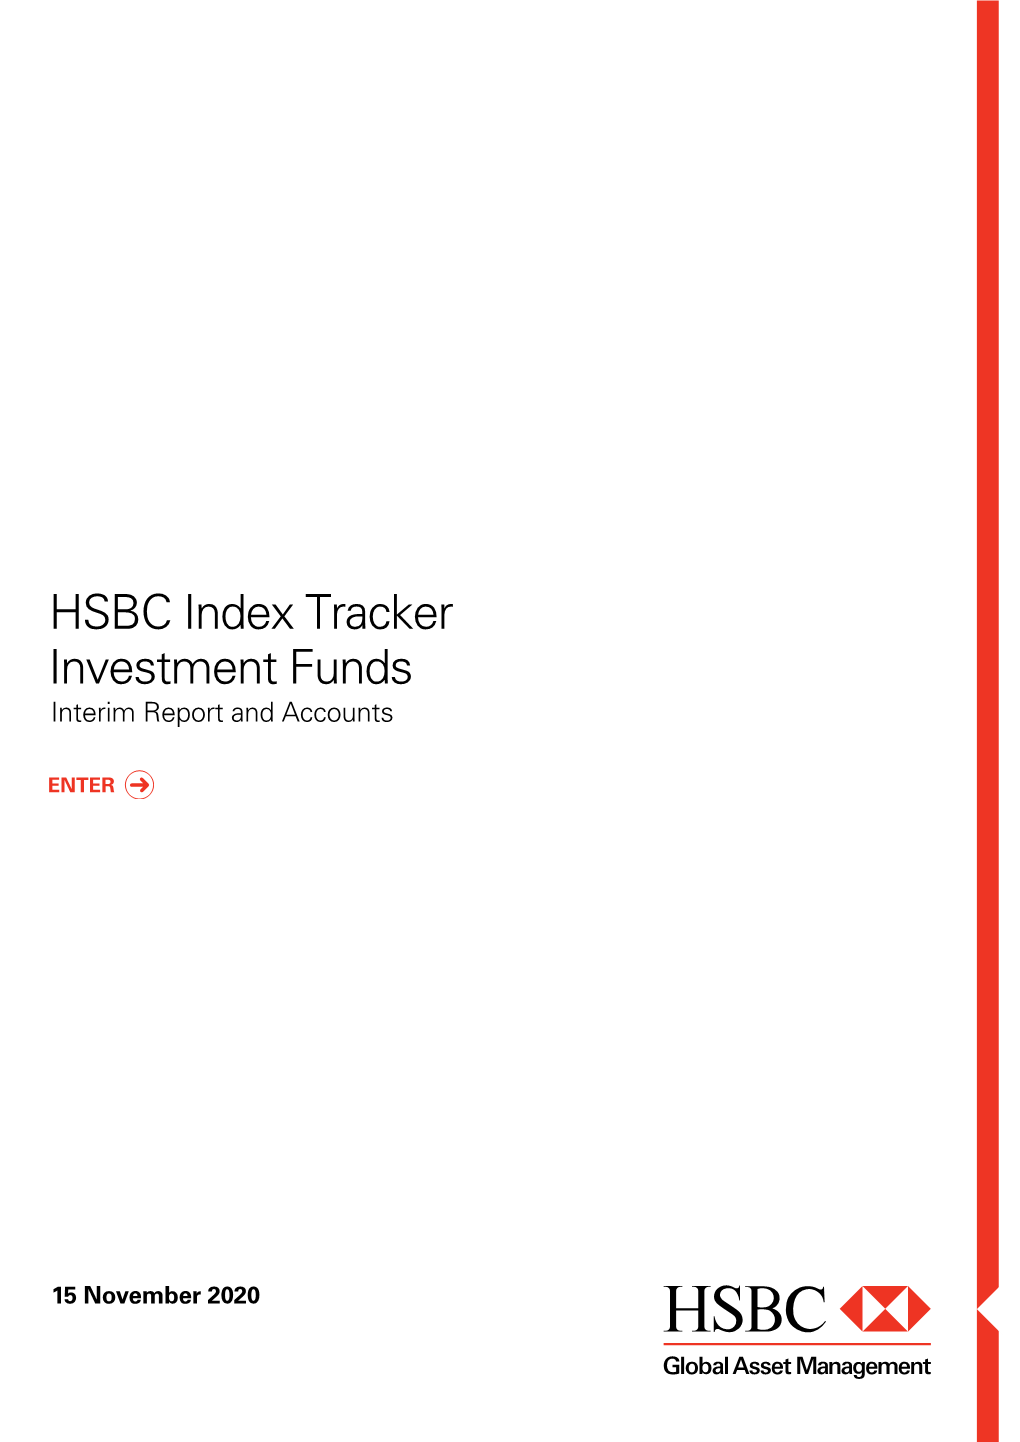 HSBC Index Tracker Investment Funds Interim Report and Accounts